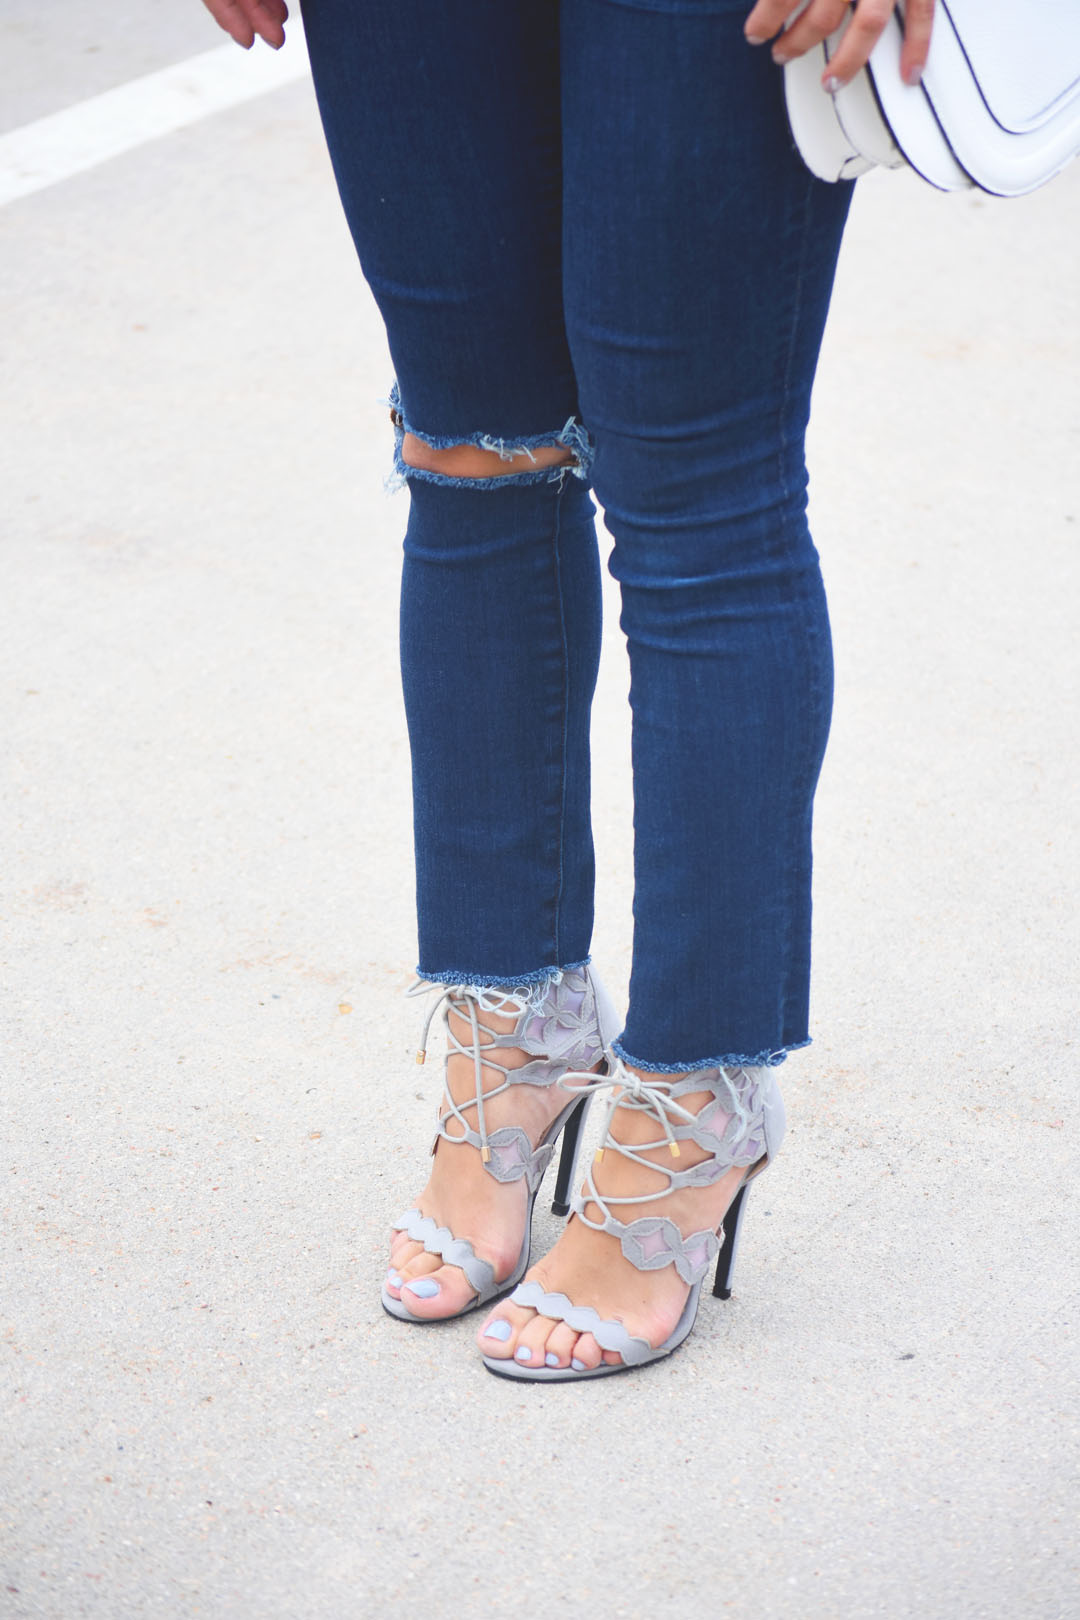 Madewell ripped jeans, and Public Desire grey lace up heeled sandals